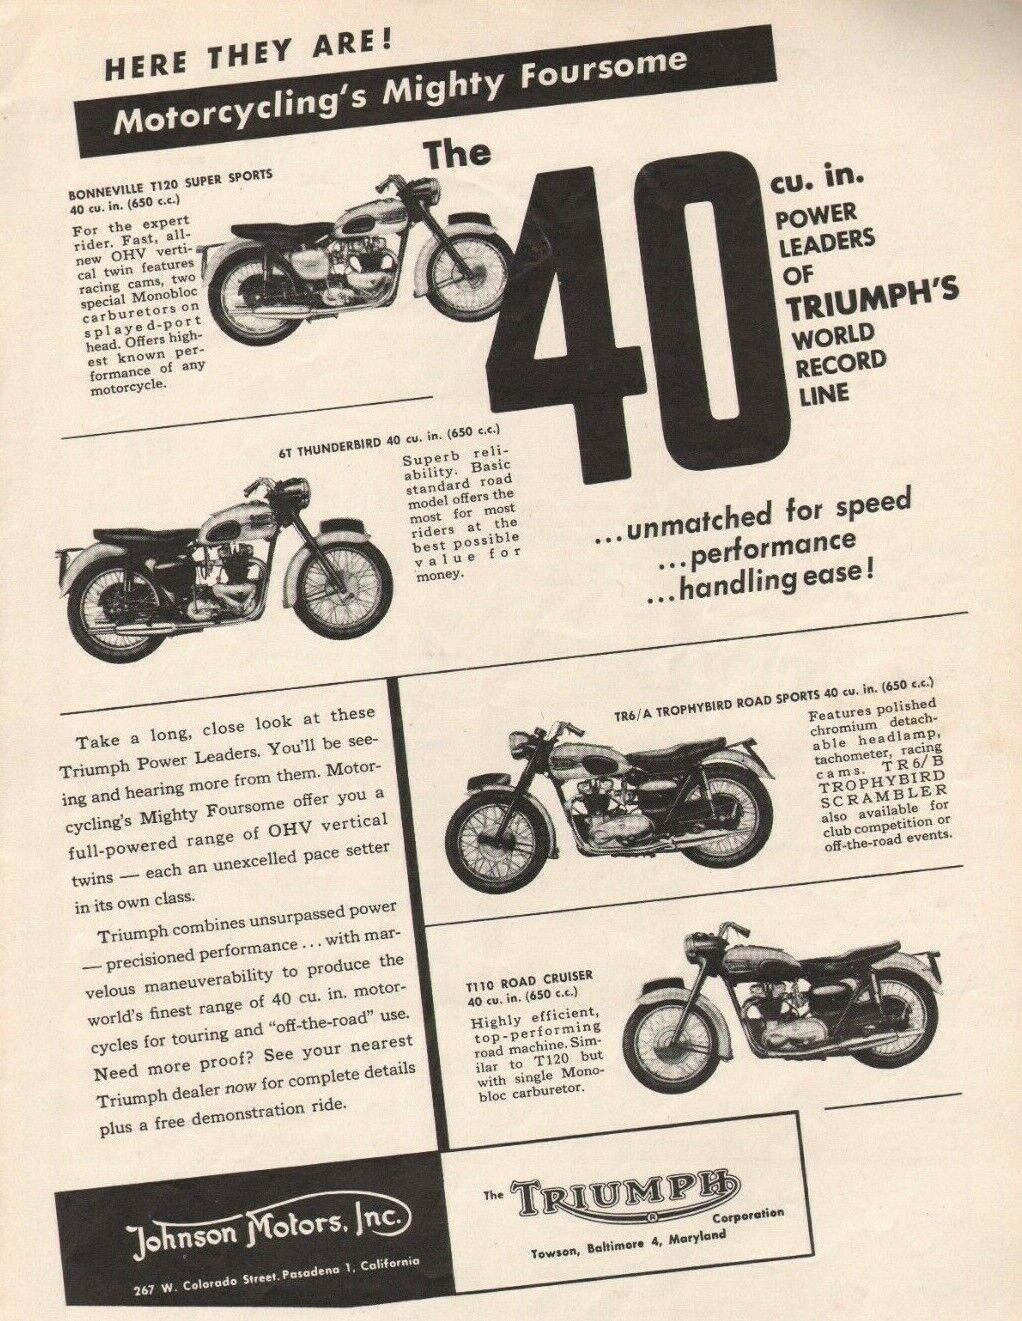 1959 Triumph Mighty Foursome - Vintage Motorcycle Ad